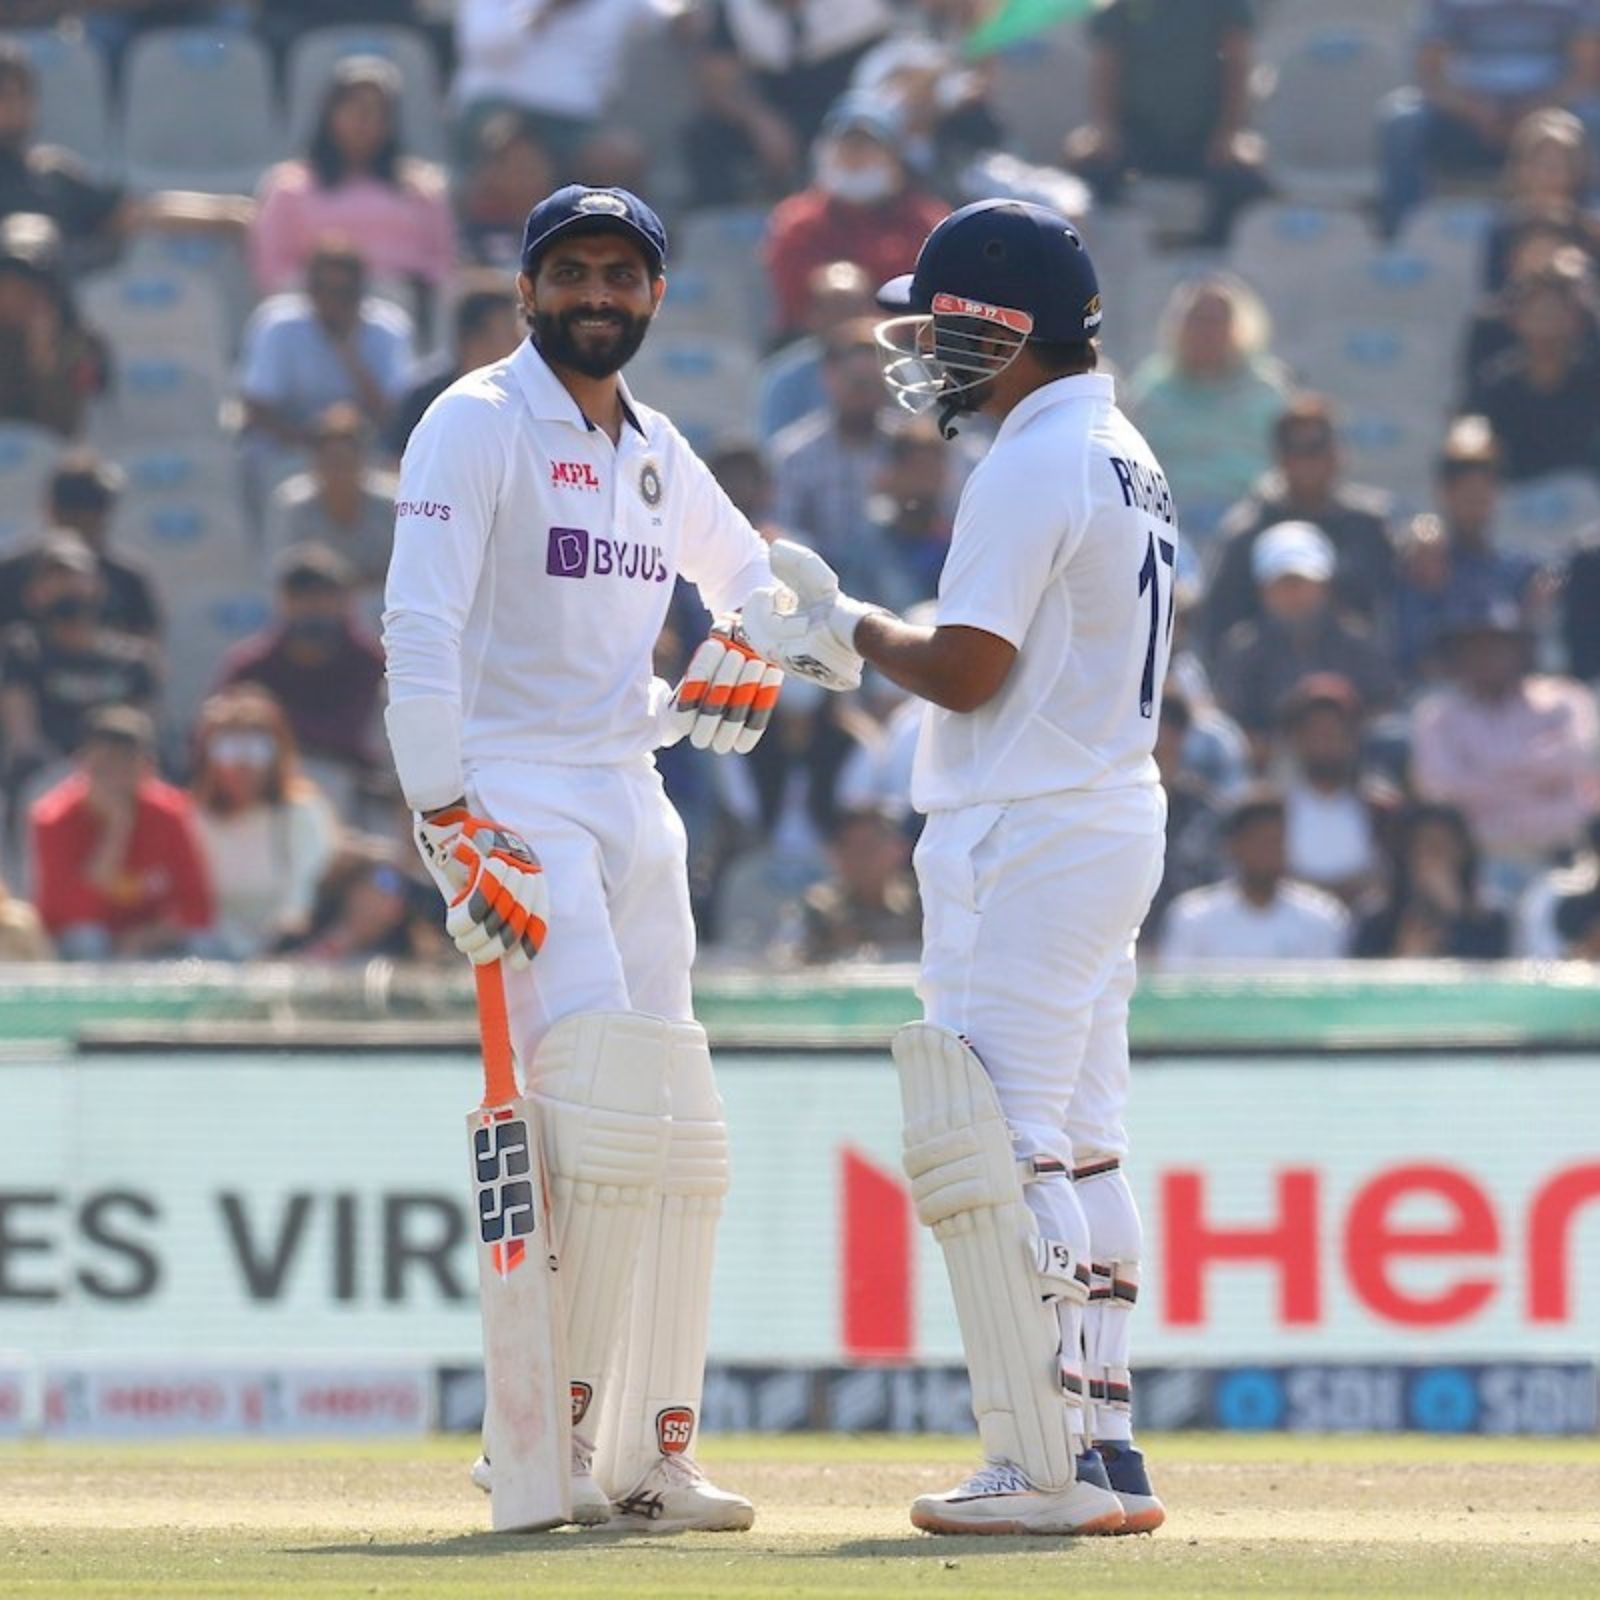 India vs Sri Lanka 2nd Test, Live Streaming When and Where to Watch Live Coverage on Live TV Online